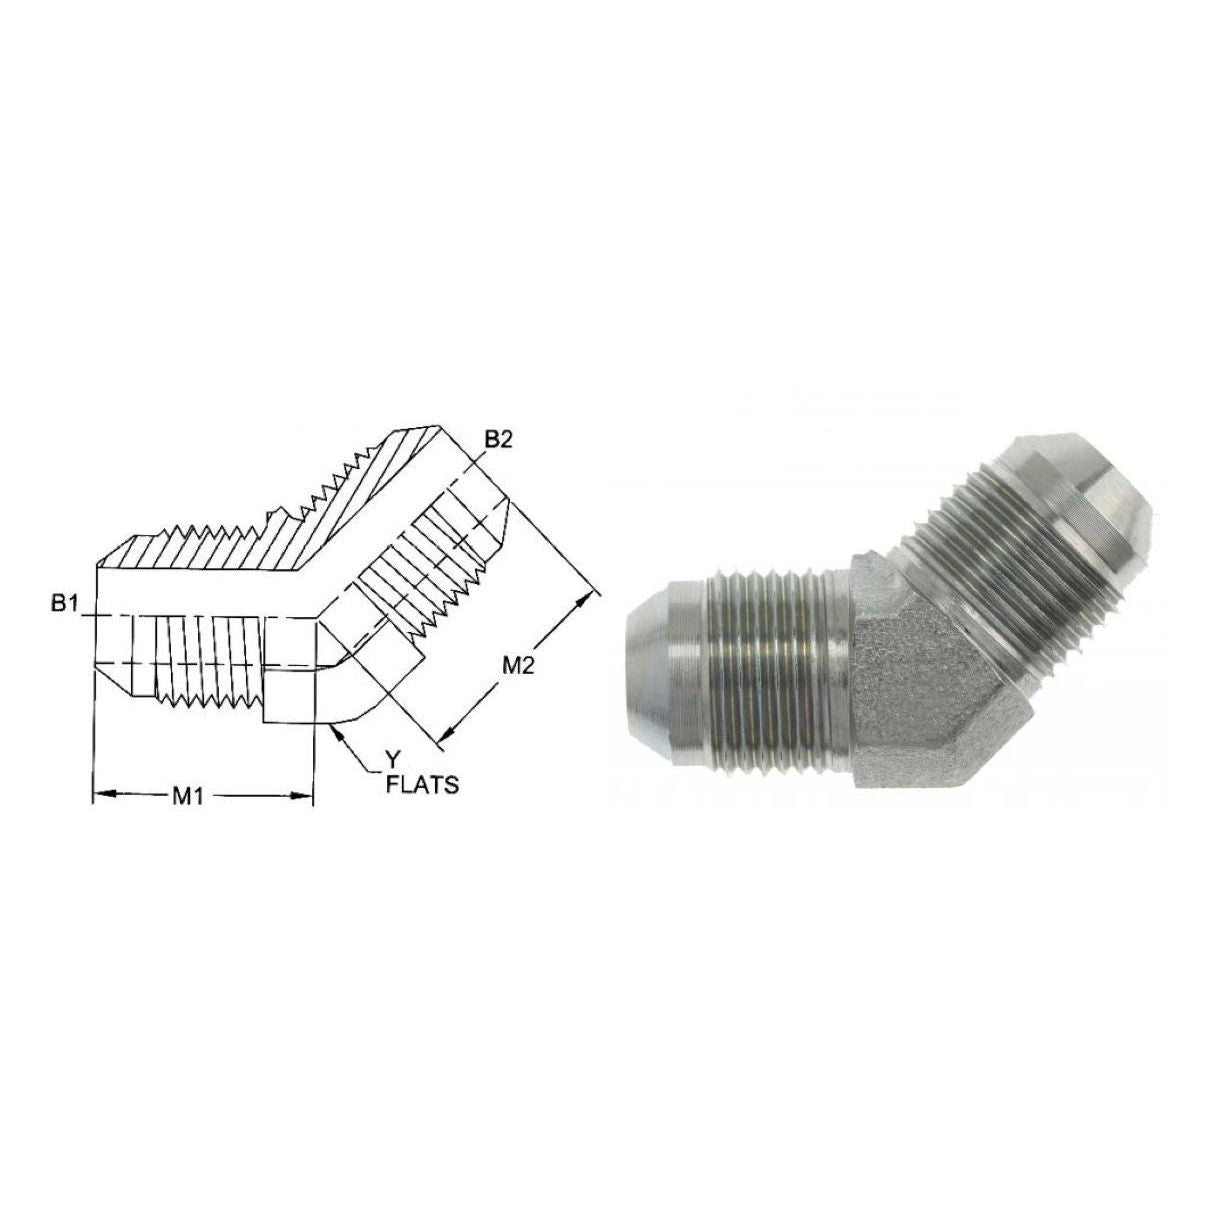 2504-06-06-SS : OneHydraulics 45-Degree Elbow, 0.375 (3/8) Male JIC x 0.375 (3/8) Male JIC, Stainless Steel, 7200psi